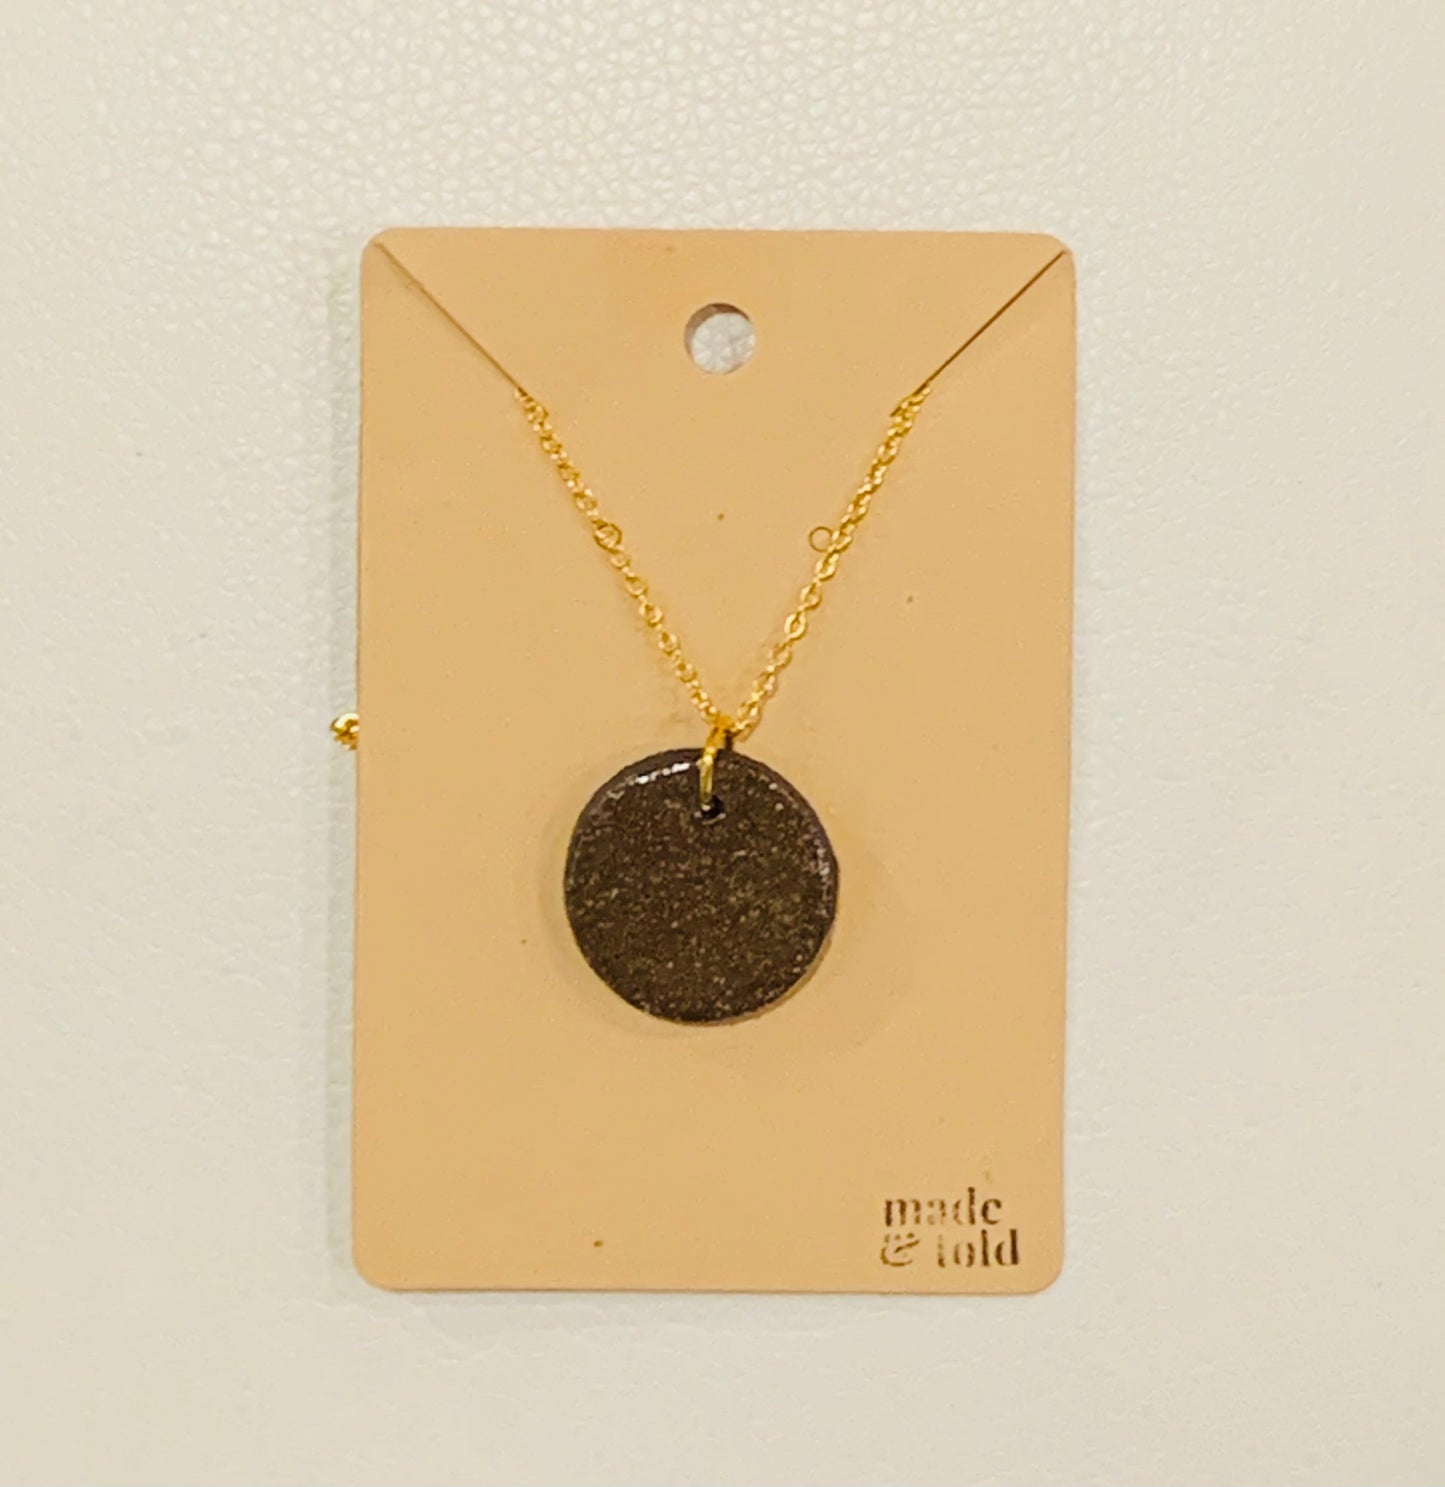 Made & Told - Clay Necklace